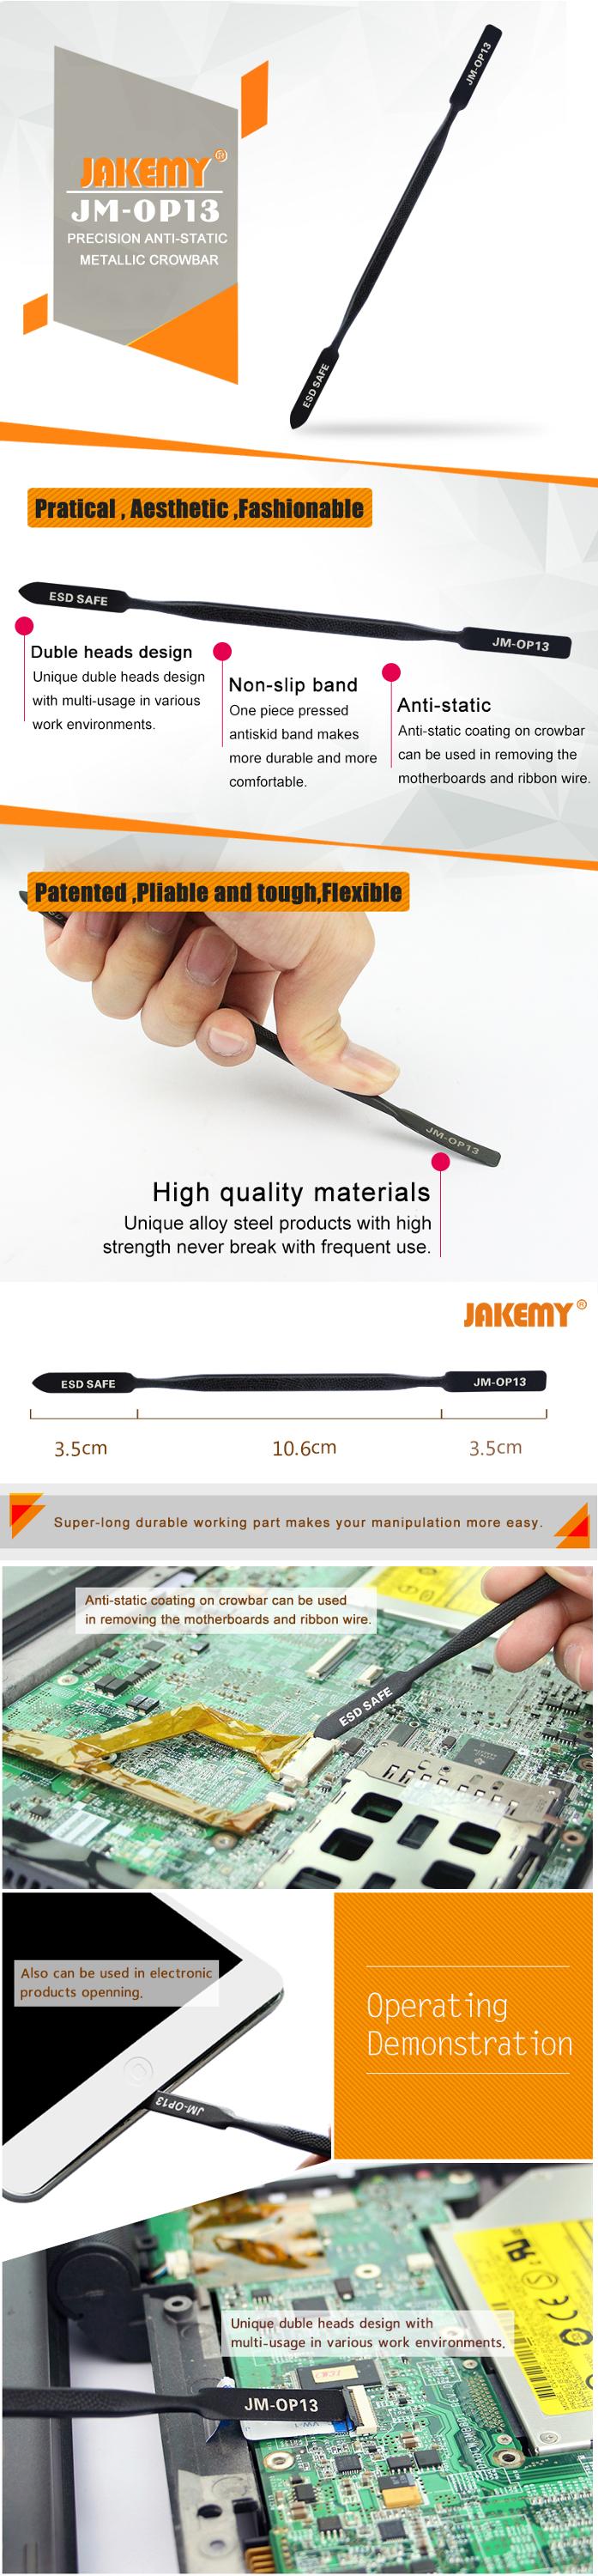 JAKEMY JM-OP13 High Quality Anti-static Double-head Crowbar ESD Spudger for Household Electronics DIY Repair Disassemble